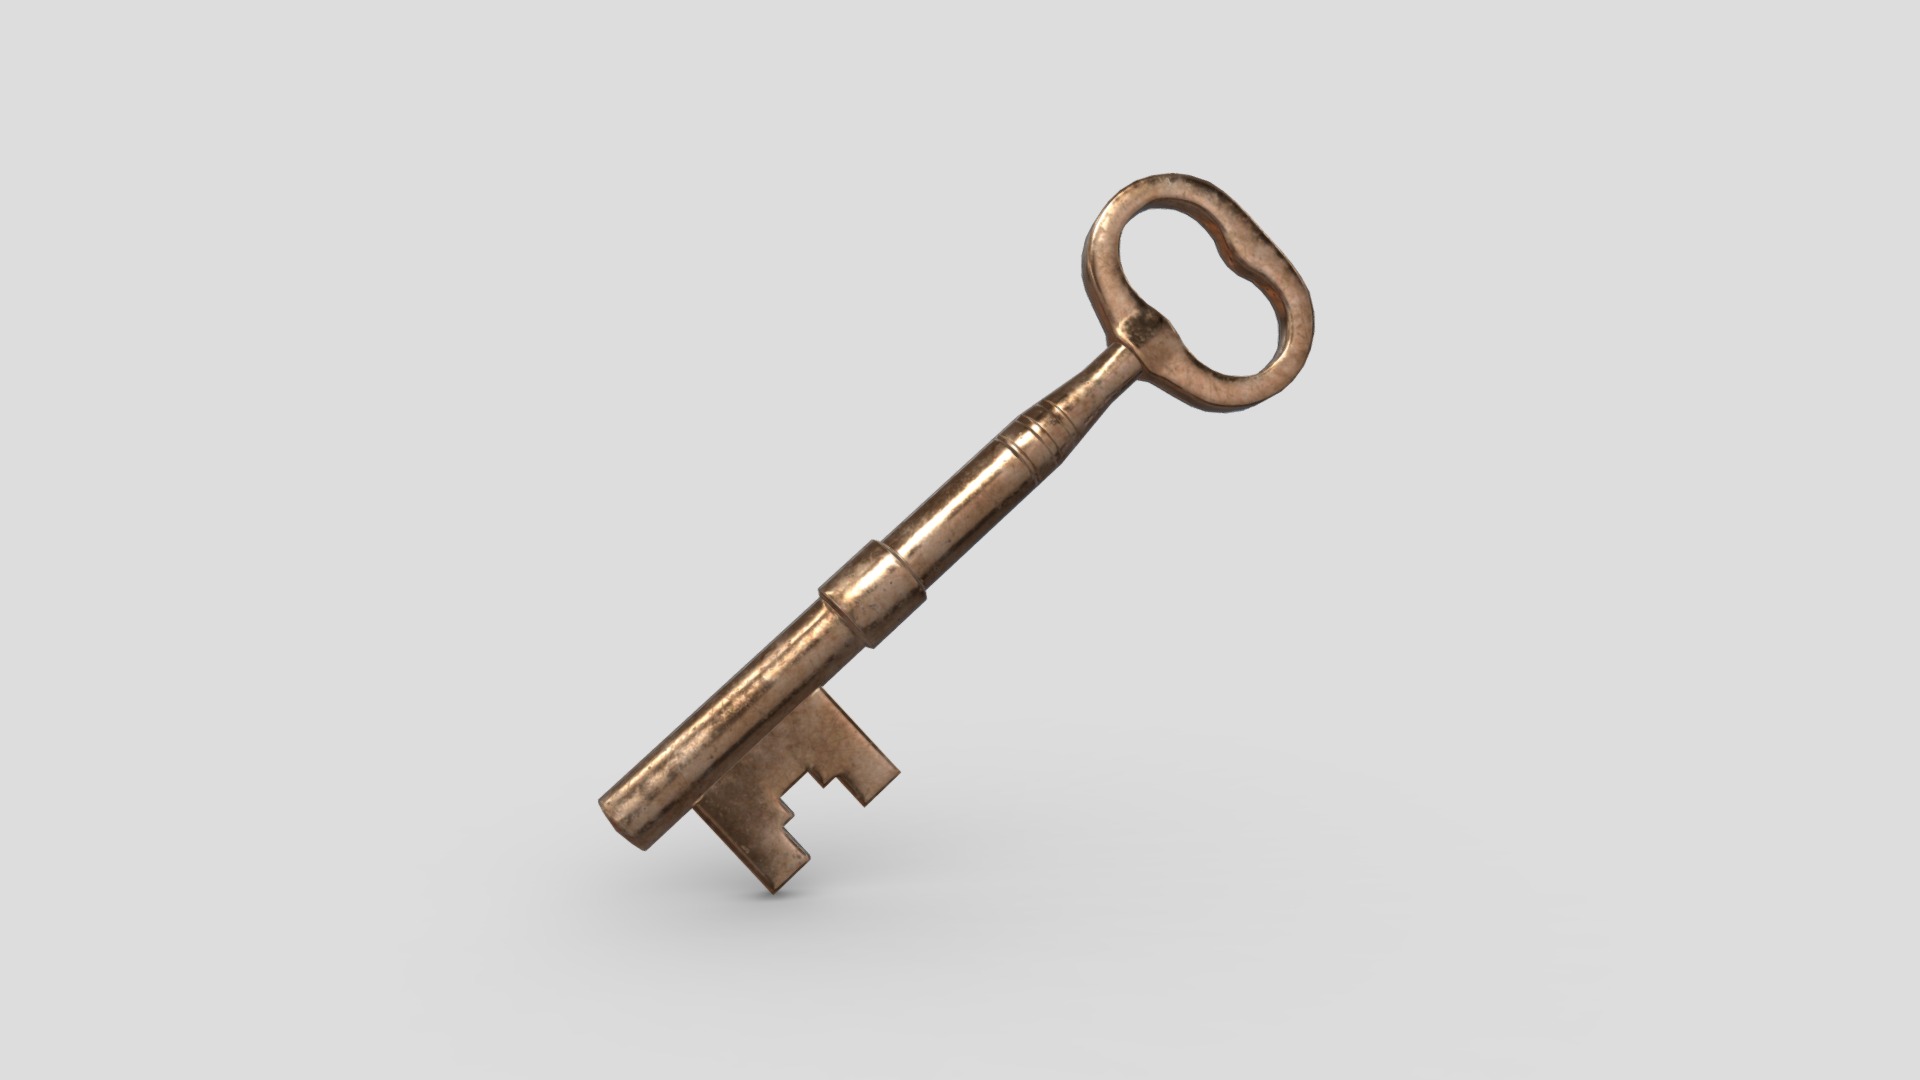 3D model Key 7 - This is a 3D model of the Key 7. The 3D model is about a key on a white background.